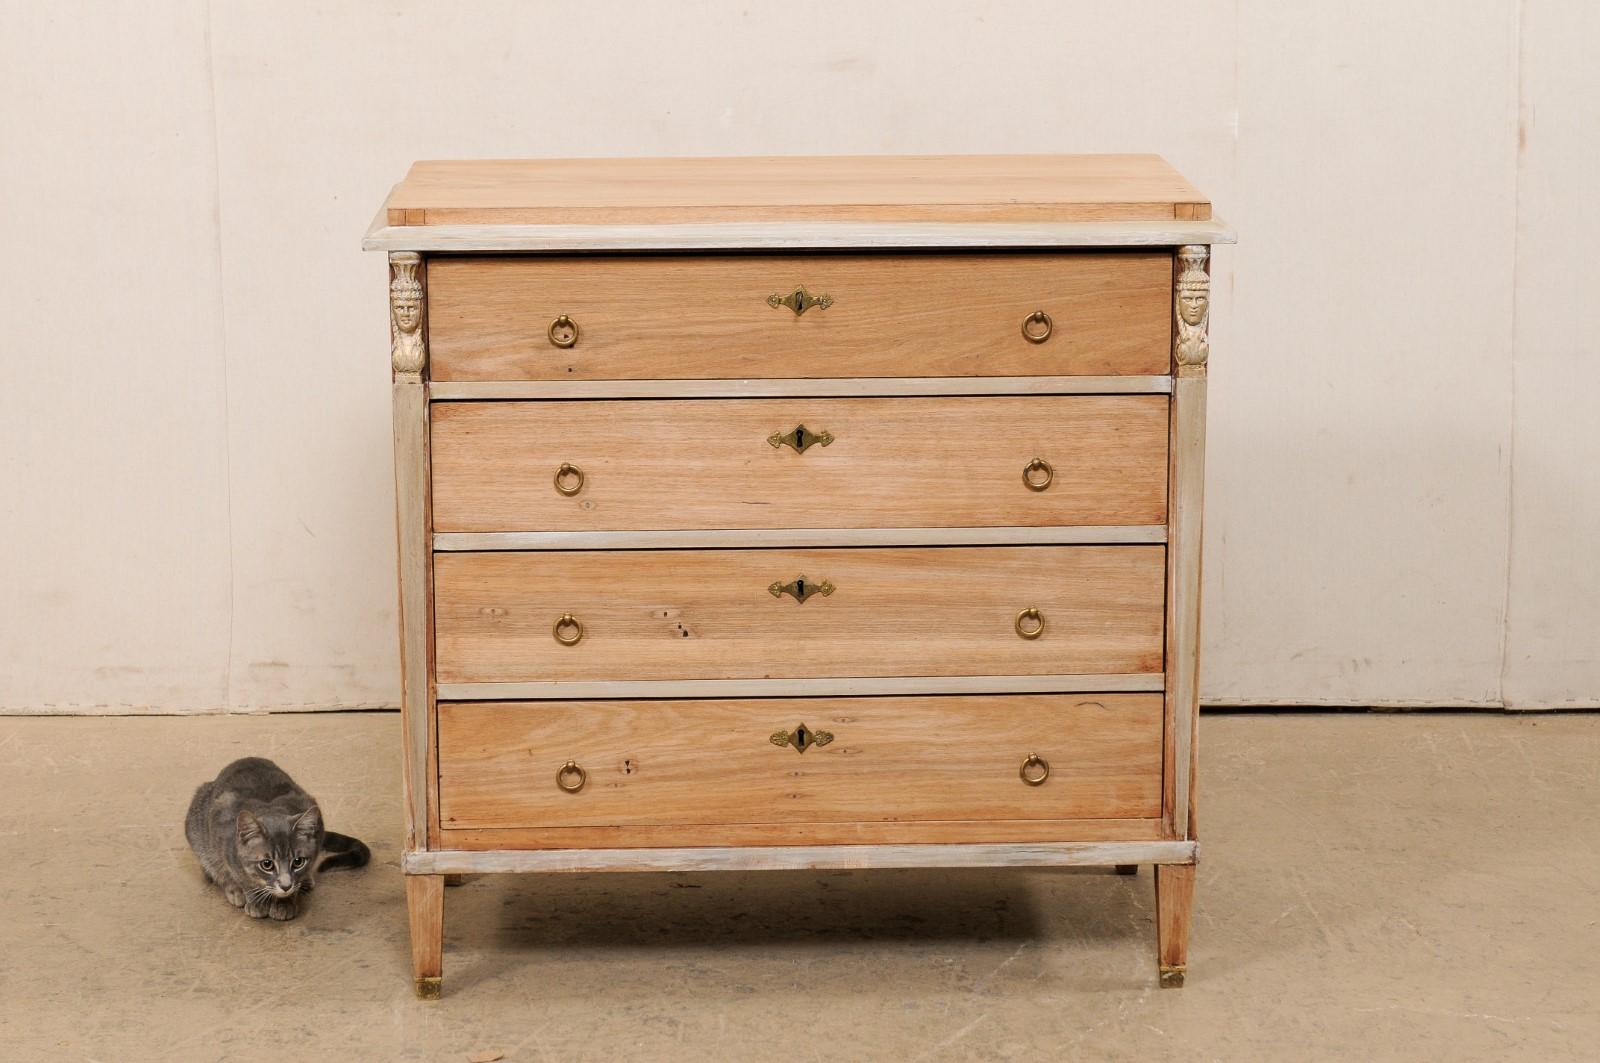 A Swedish gustavian bleached-wood chest of drawers, circa 1820-1840. This antique chest from Sweden, in typical Gustavian style, features a simple, clean design with a slightly overhanging lip about the top edge, with case below housing four